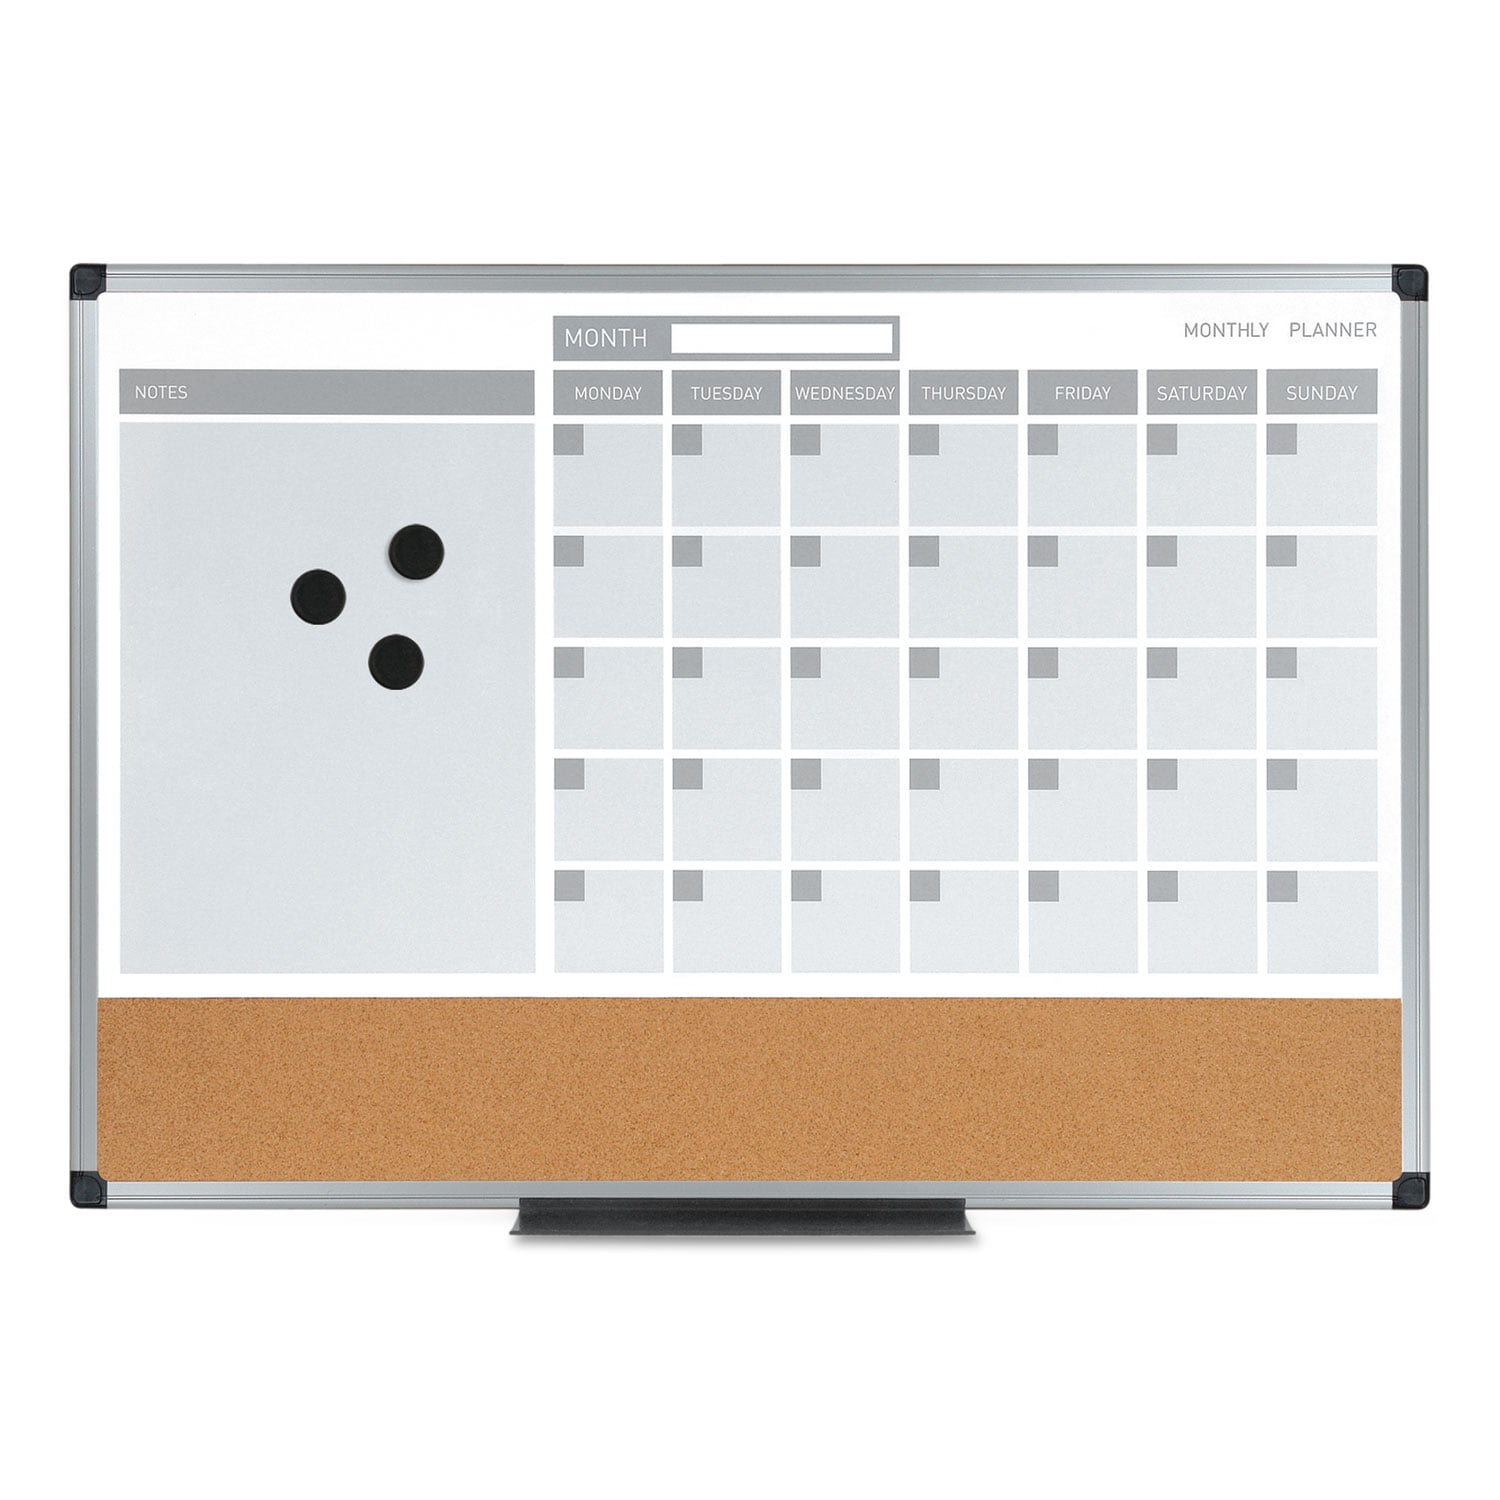 1 x 2 Grid Aluminum Frame 36 x 24 All Purpose Magnetic Planning Board 